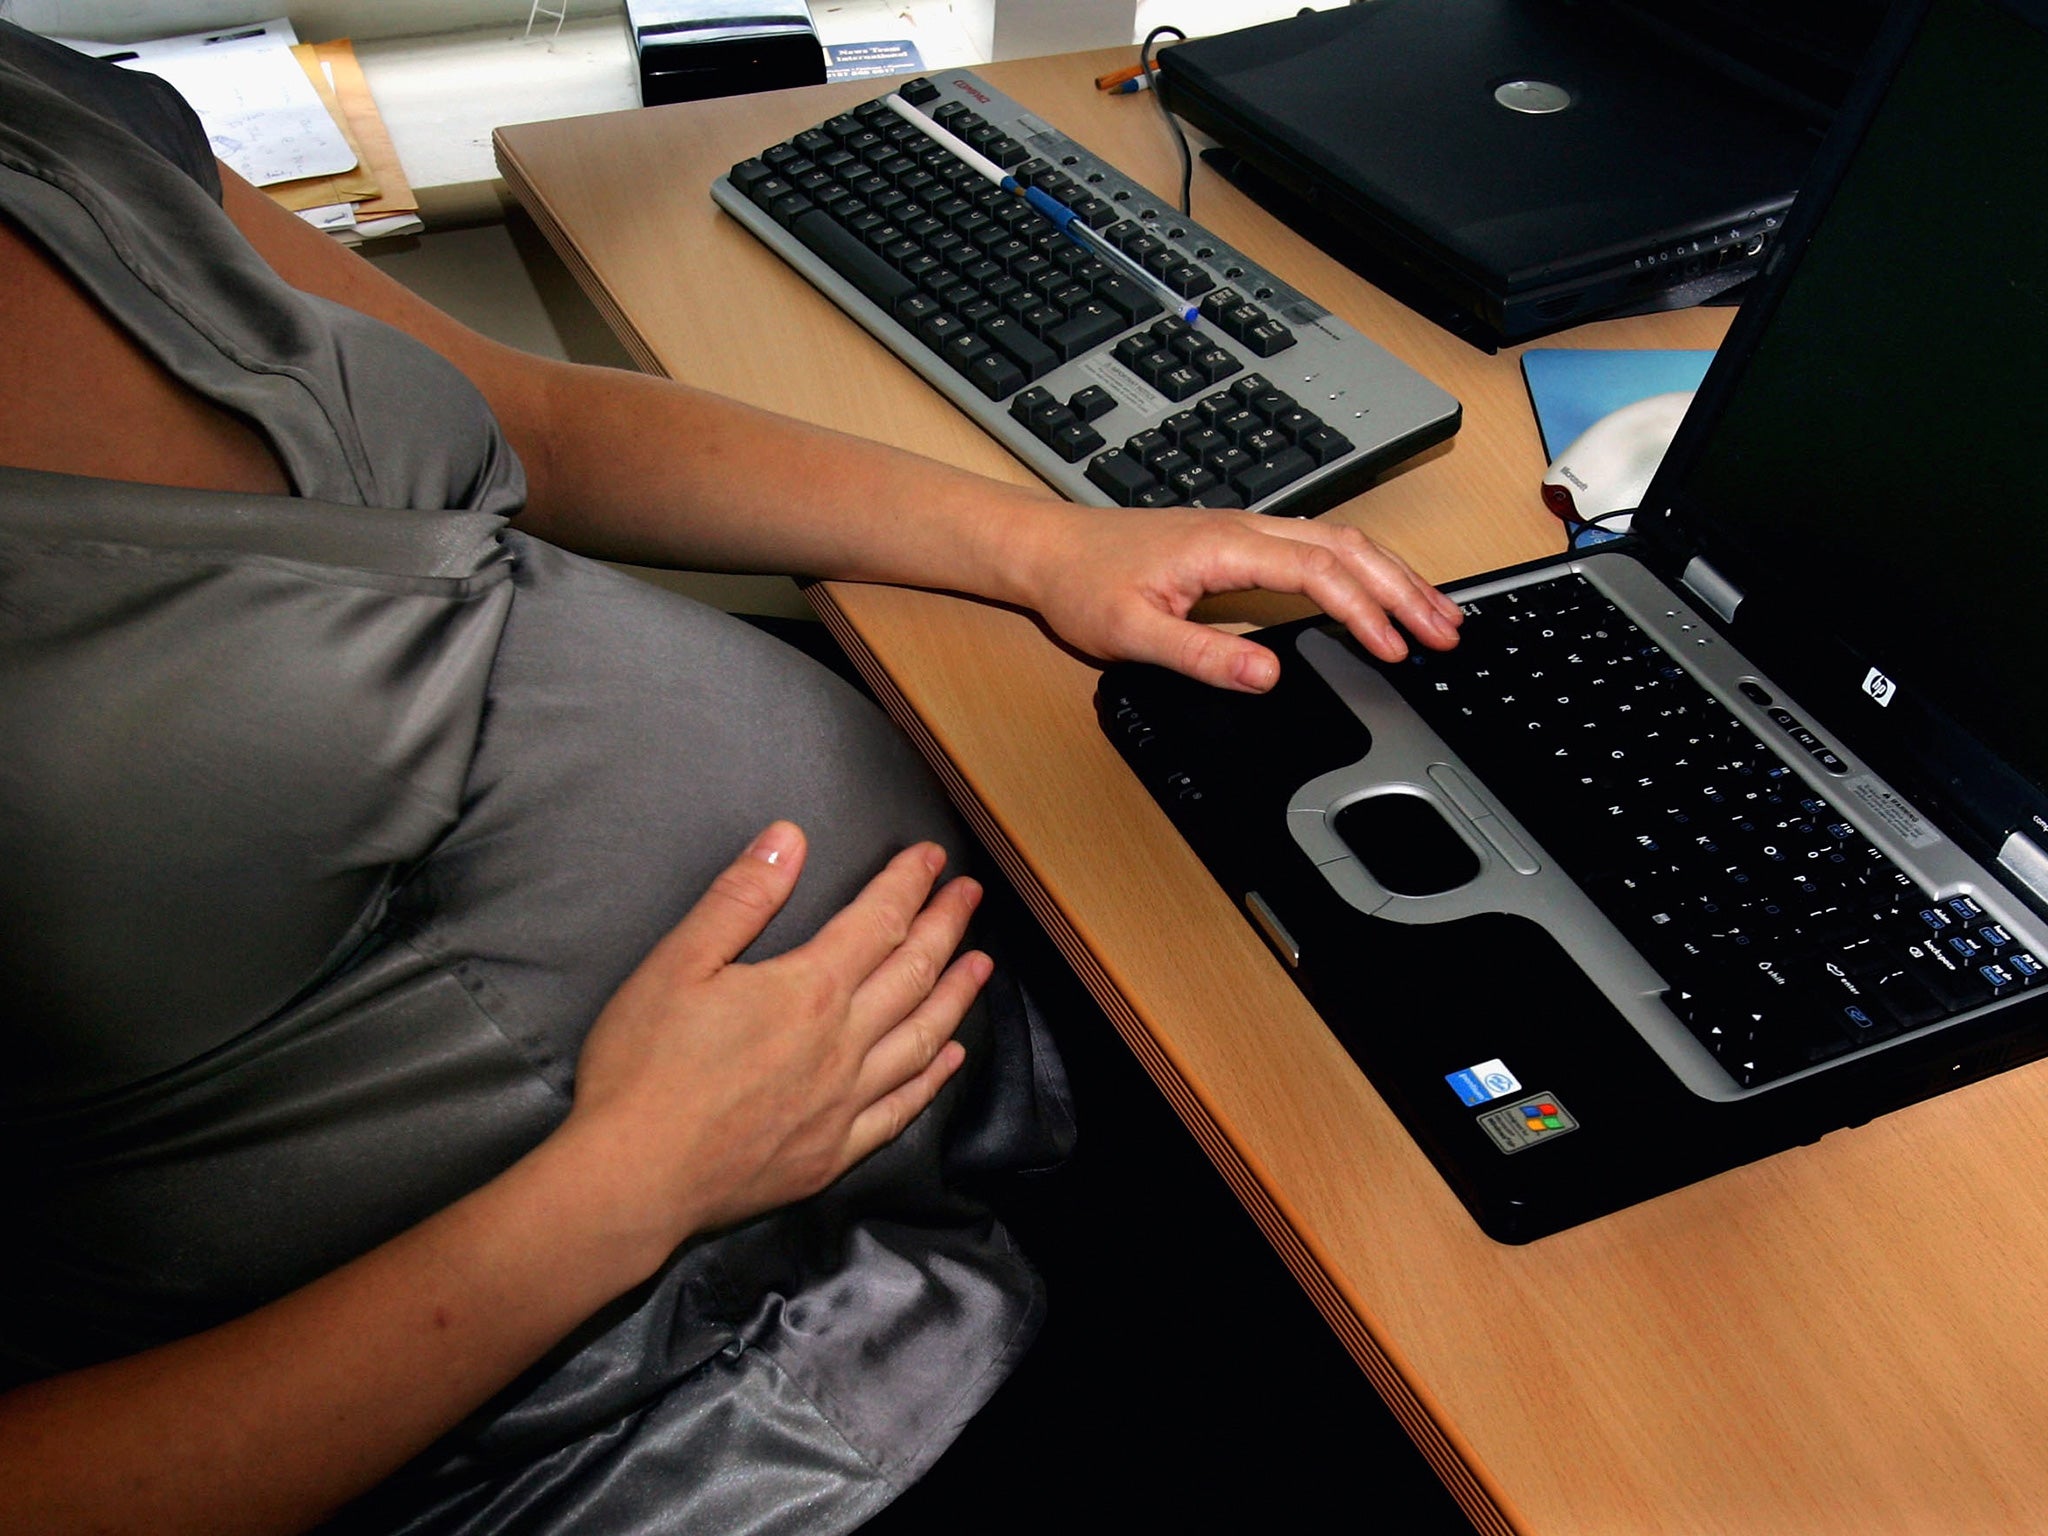 Maternity and pregnancy make up just 3 per cent of all discrimination claims